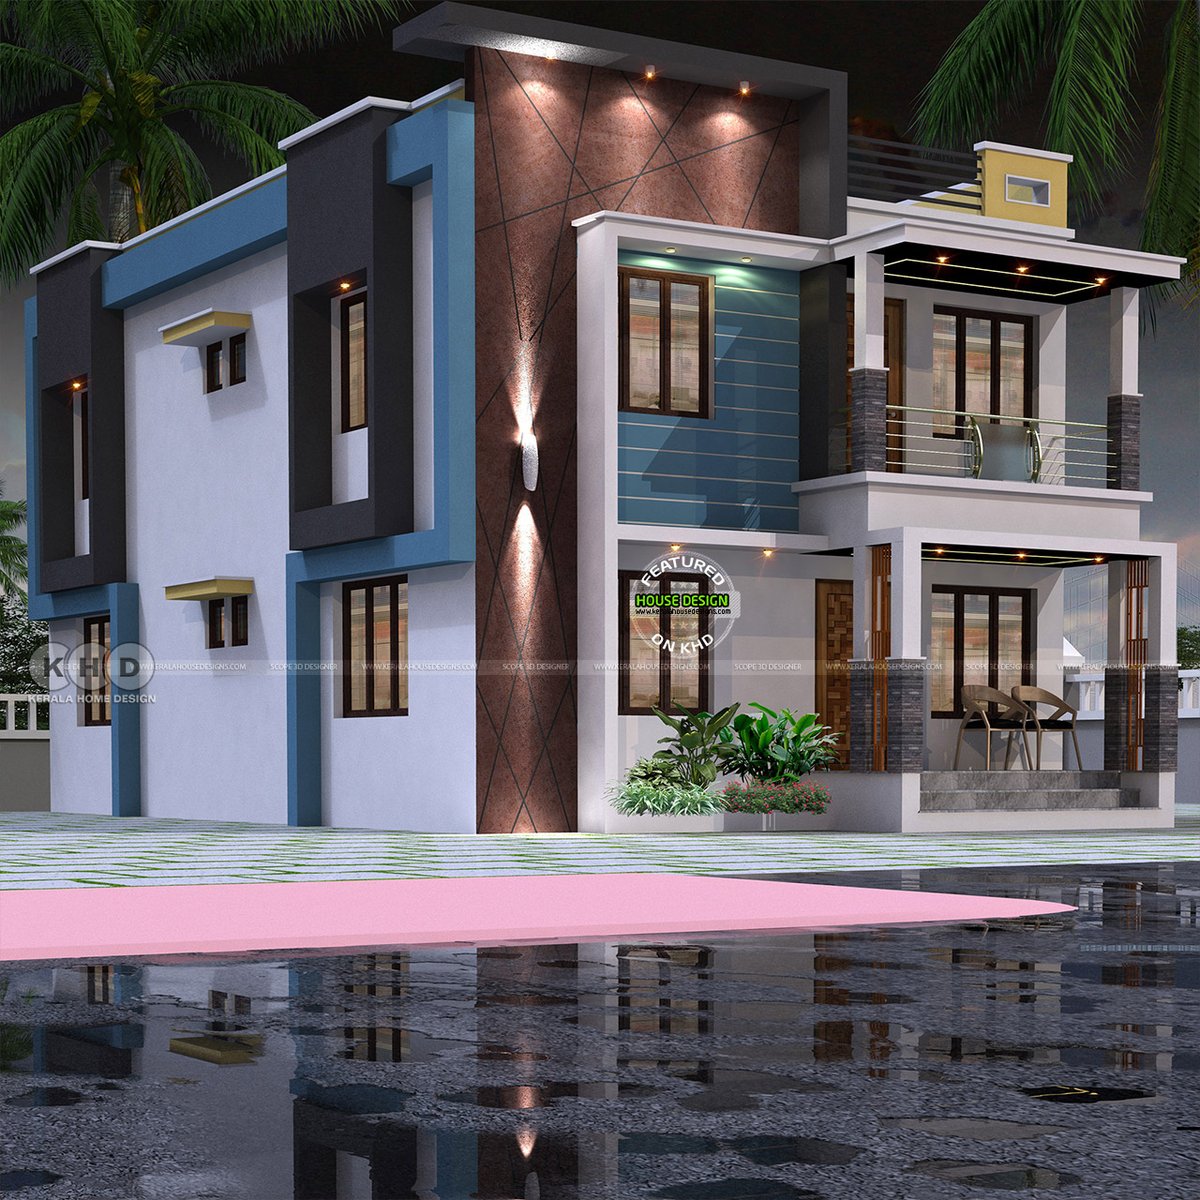 🏡 Discover your dream home! Explore this modern 2245 sq. ft. 5-bedroom box model home with a colorful exterior. Check it out: keralahousedesigns.com/2024/05/modern… #HomeDesign #ModernLiving #Architecture #BoxTypeHome #KeralaHomeDesign